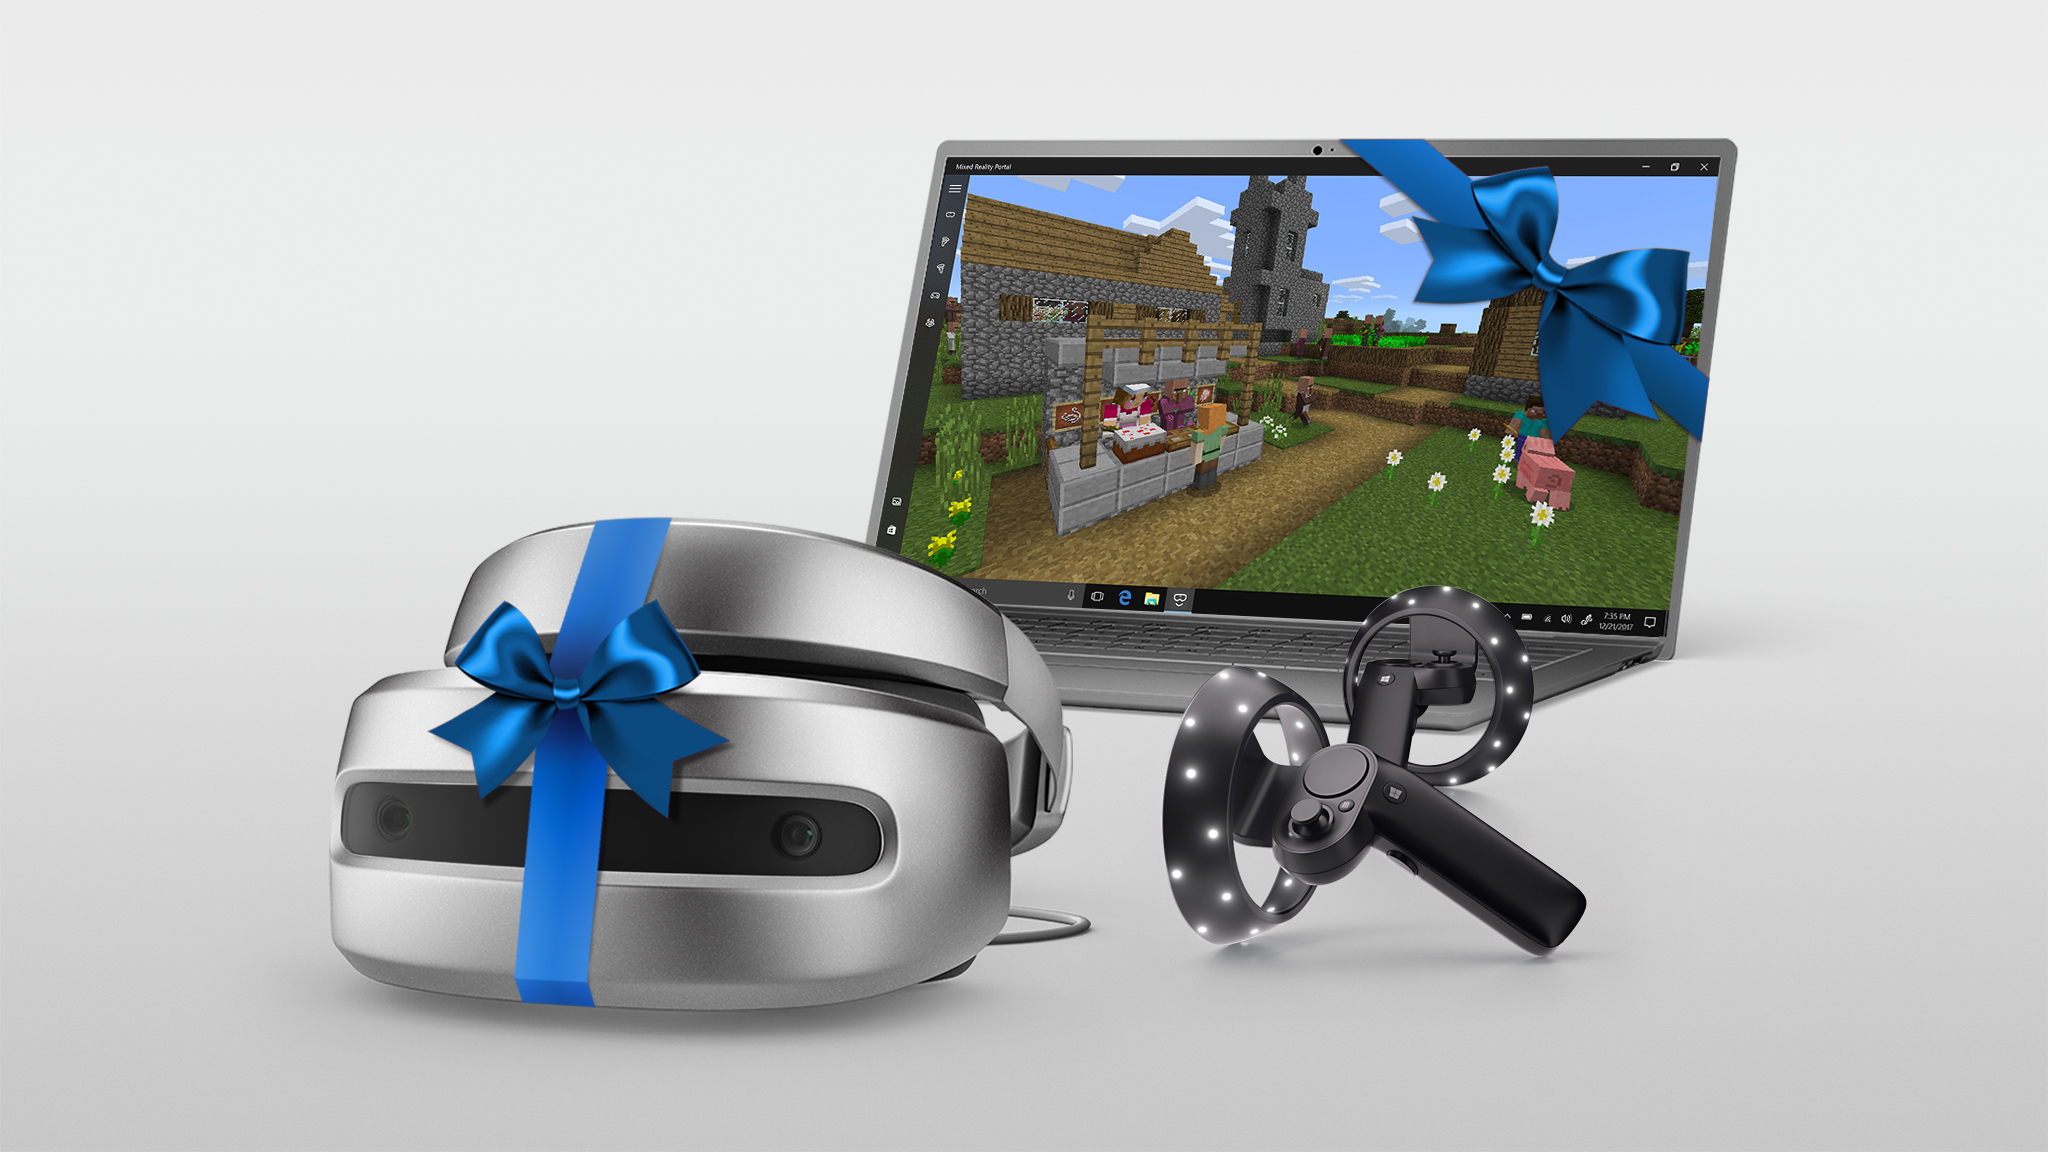 Windows Mixed Reality headset wrapped in a blue bow pictured next to a Windows 10 PC and Motion Controllers.